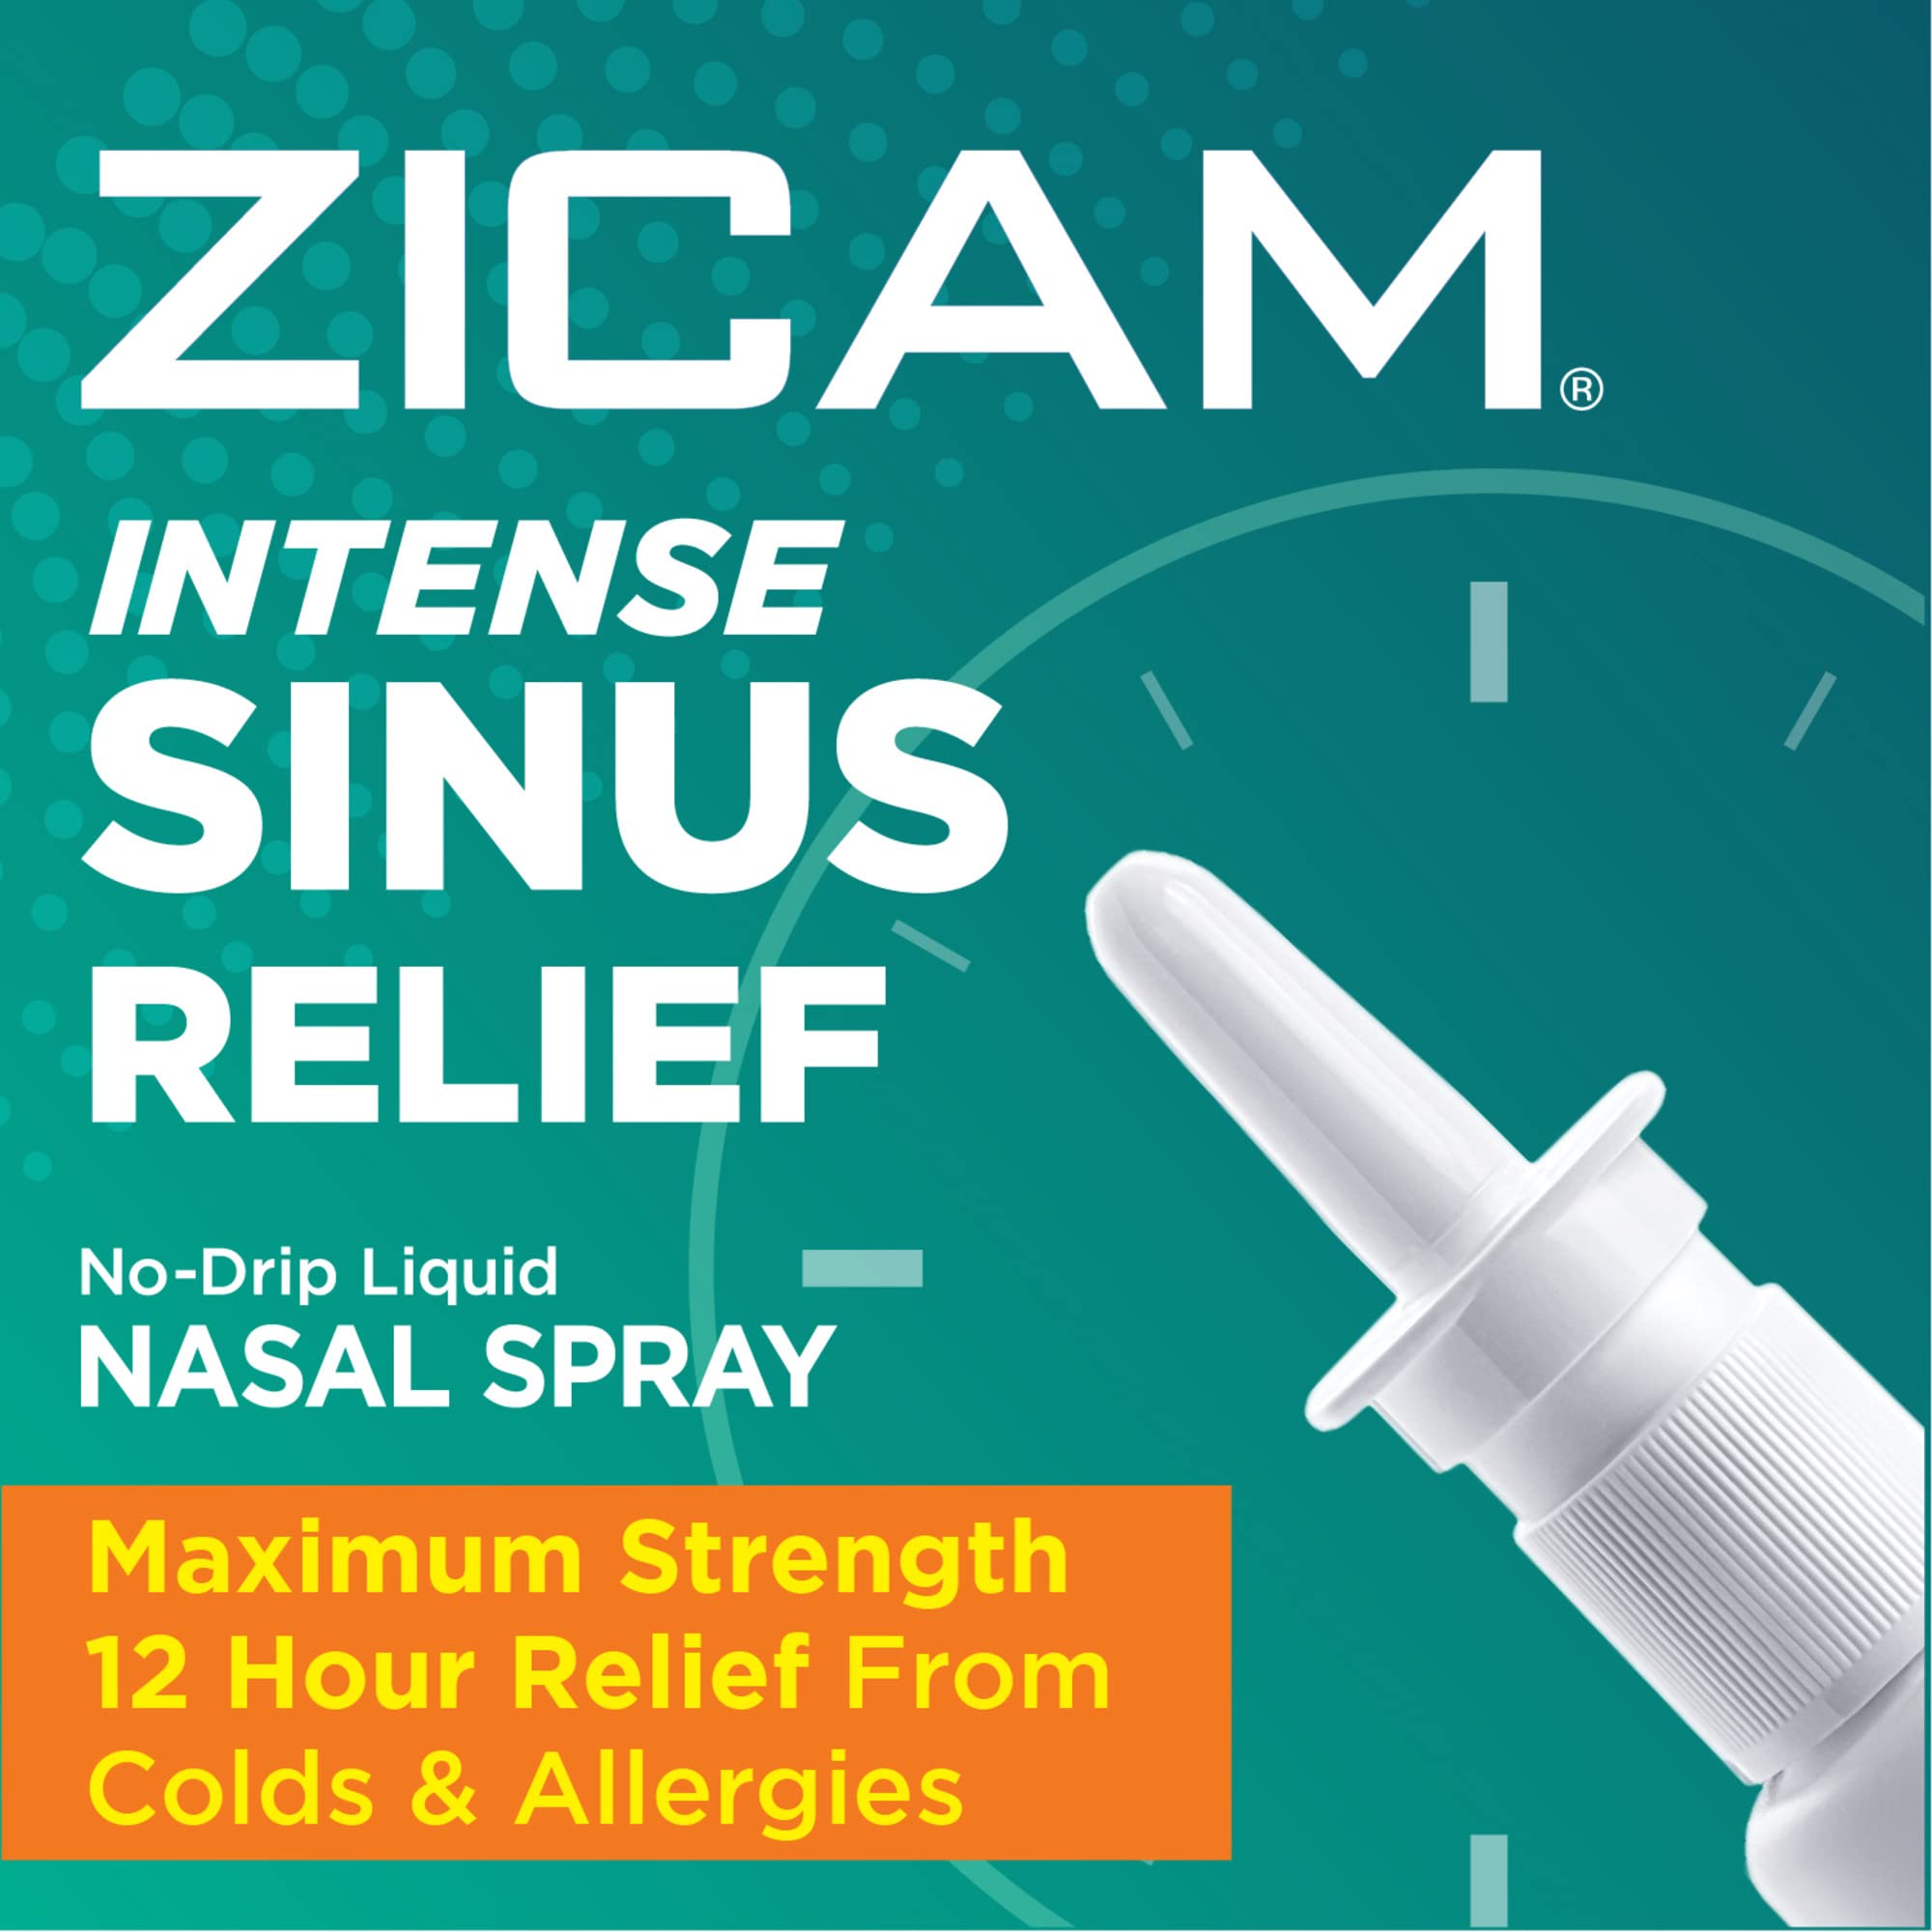 Zicam Intense Sinus Relief No-Drip Liquid Nasal Spray with Cooling Menthol & Eucalyptus, 0.5 Ounce (Pack of 5)